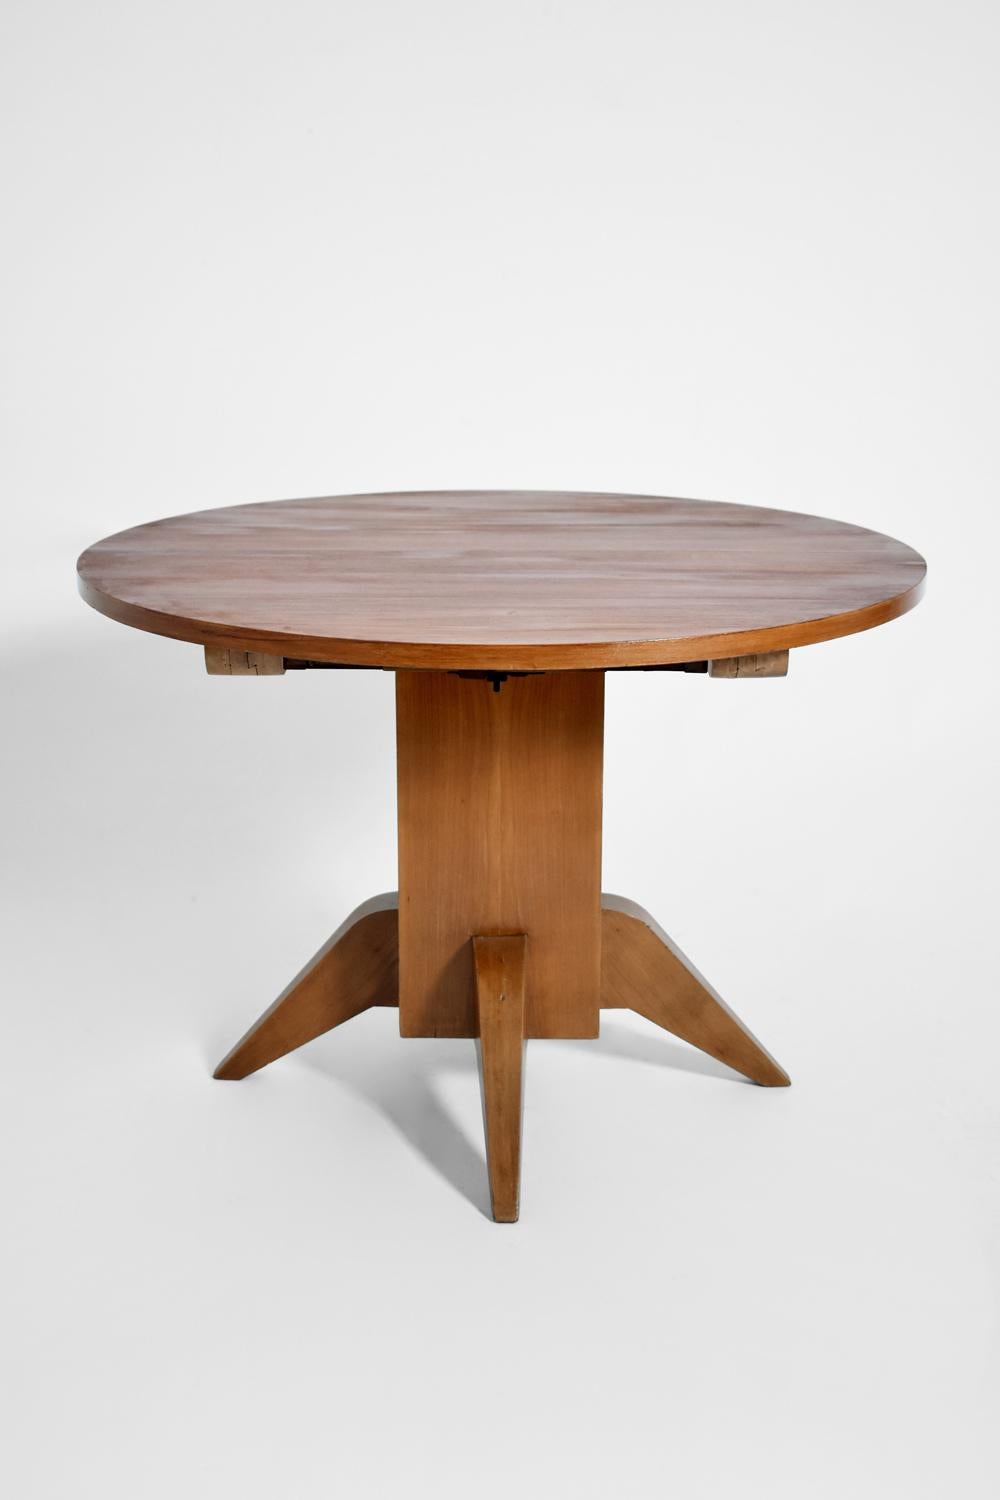 Round wooden dining table with two extensions supported by a square pillar and triangular legs. 